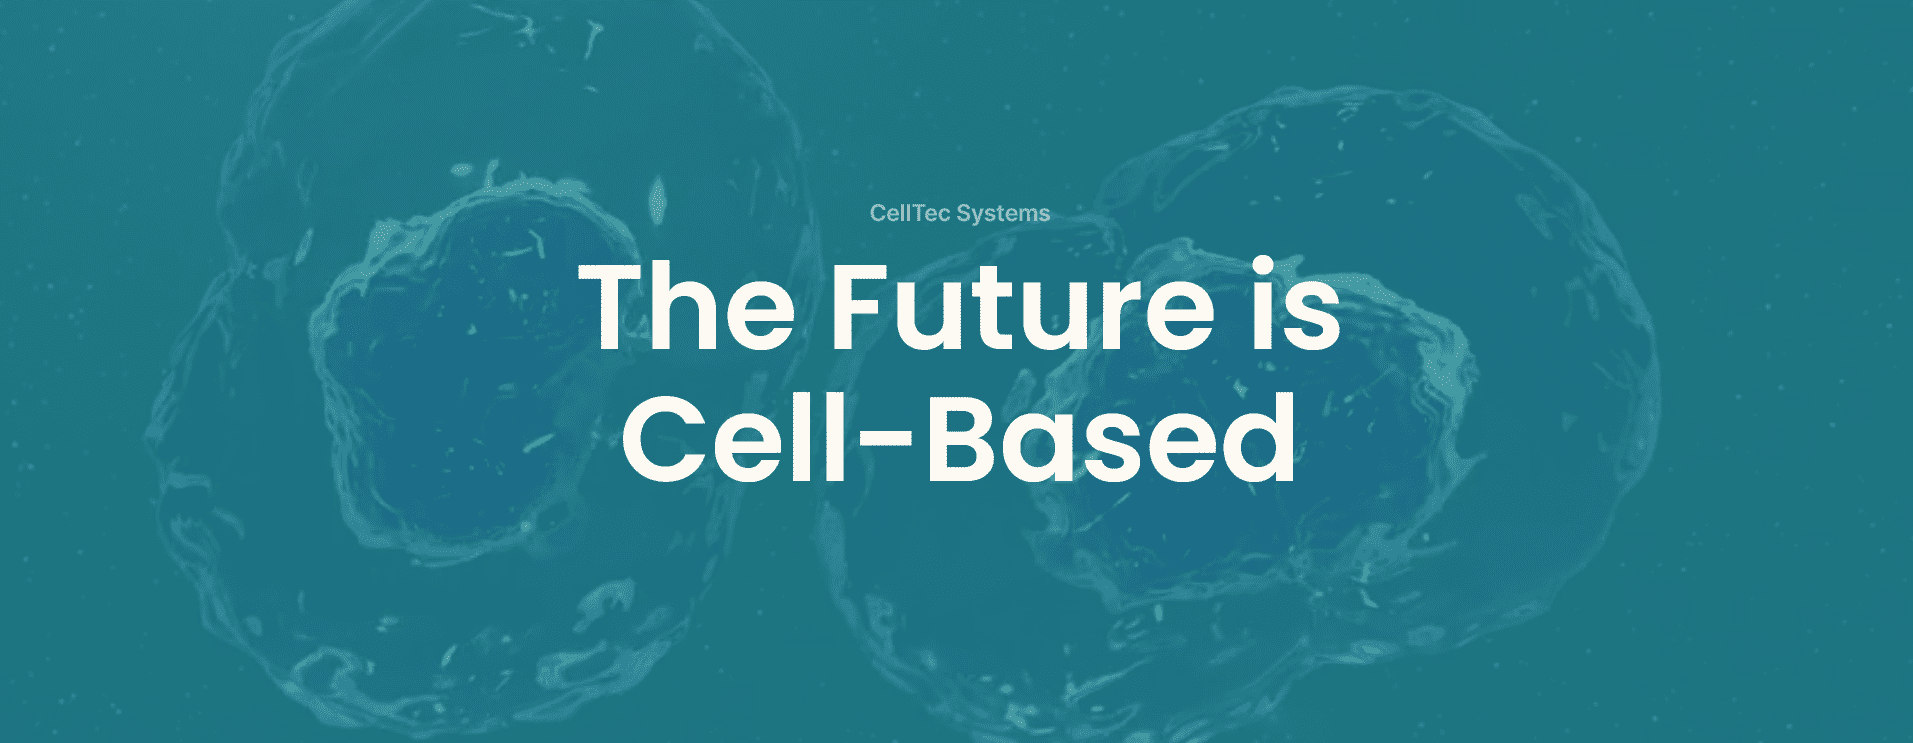 The Future is Cell-Based - CellTec Systems GmbH